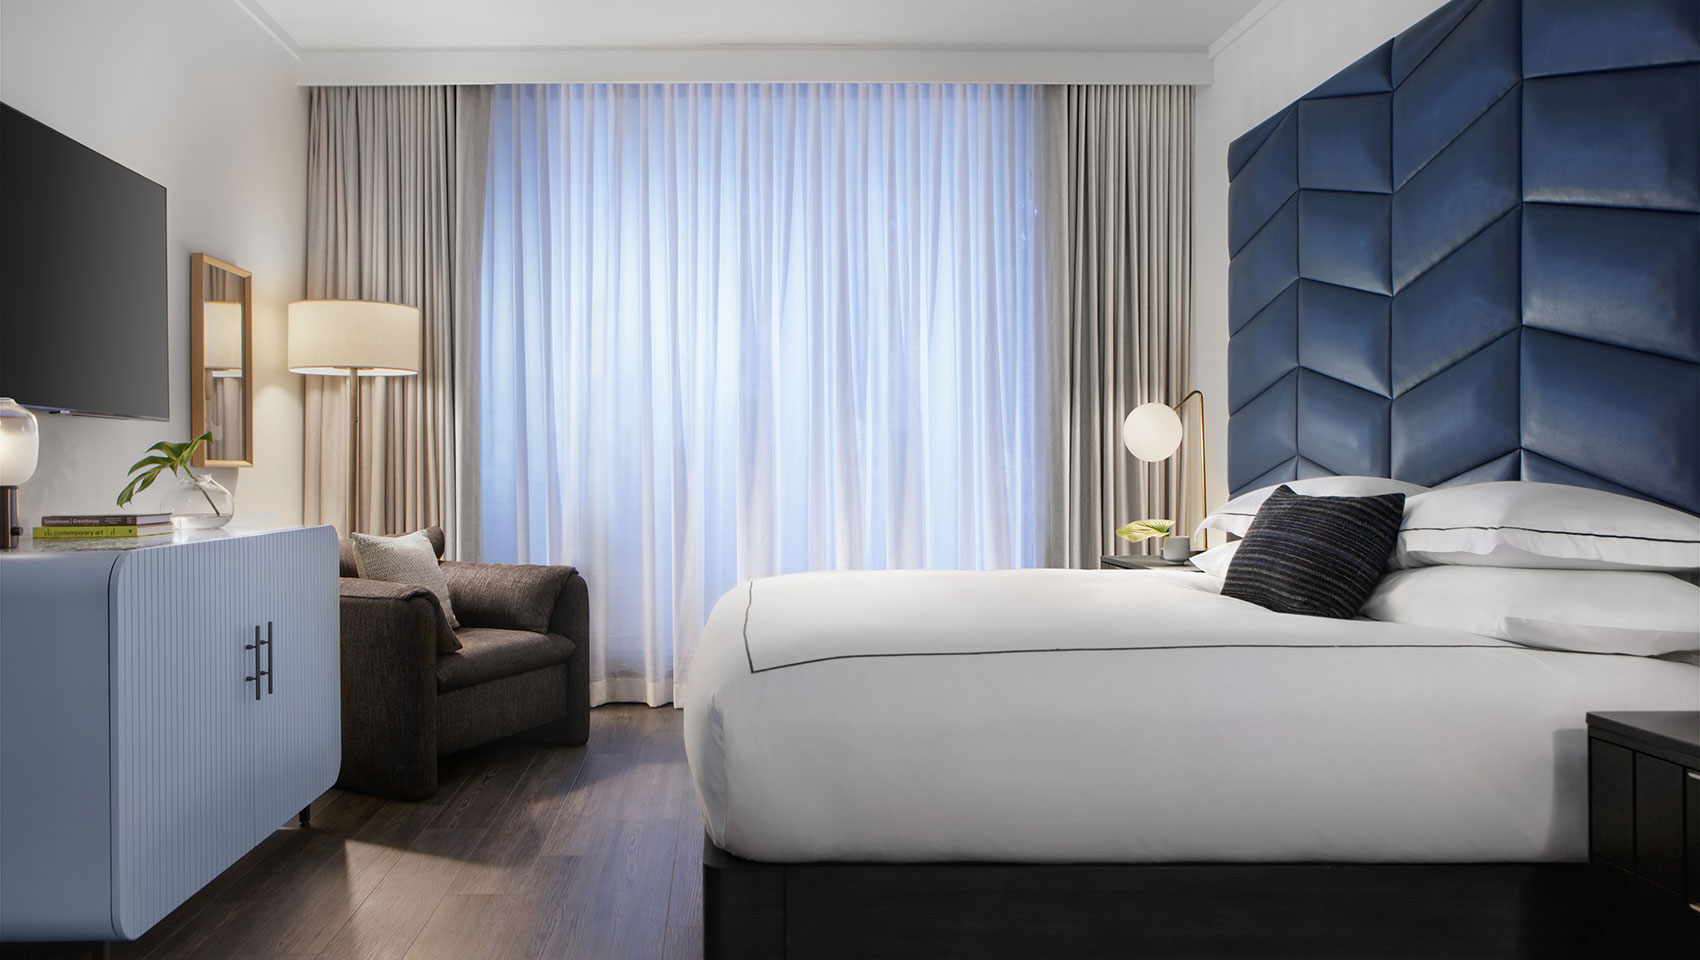 Kimpton Shane guestroom with large white king size bed and blue headboard